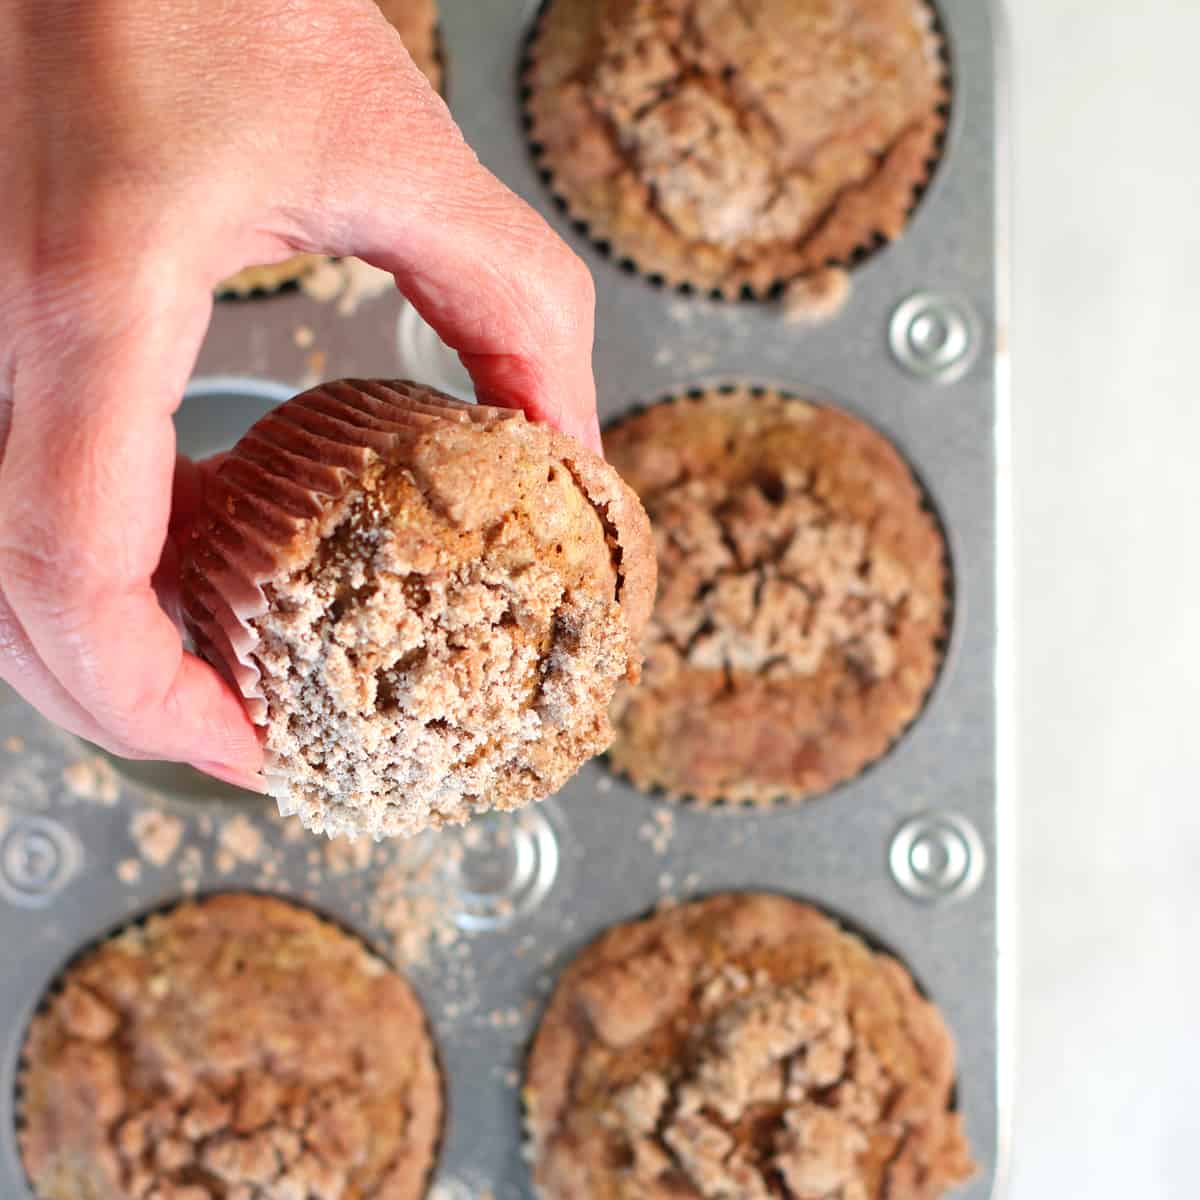 baked muffins with streusel on top.